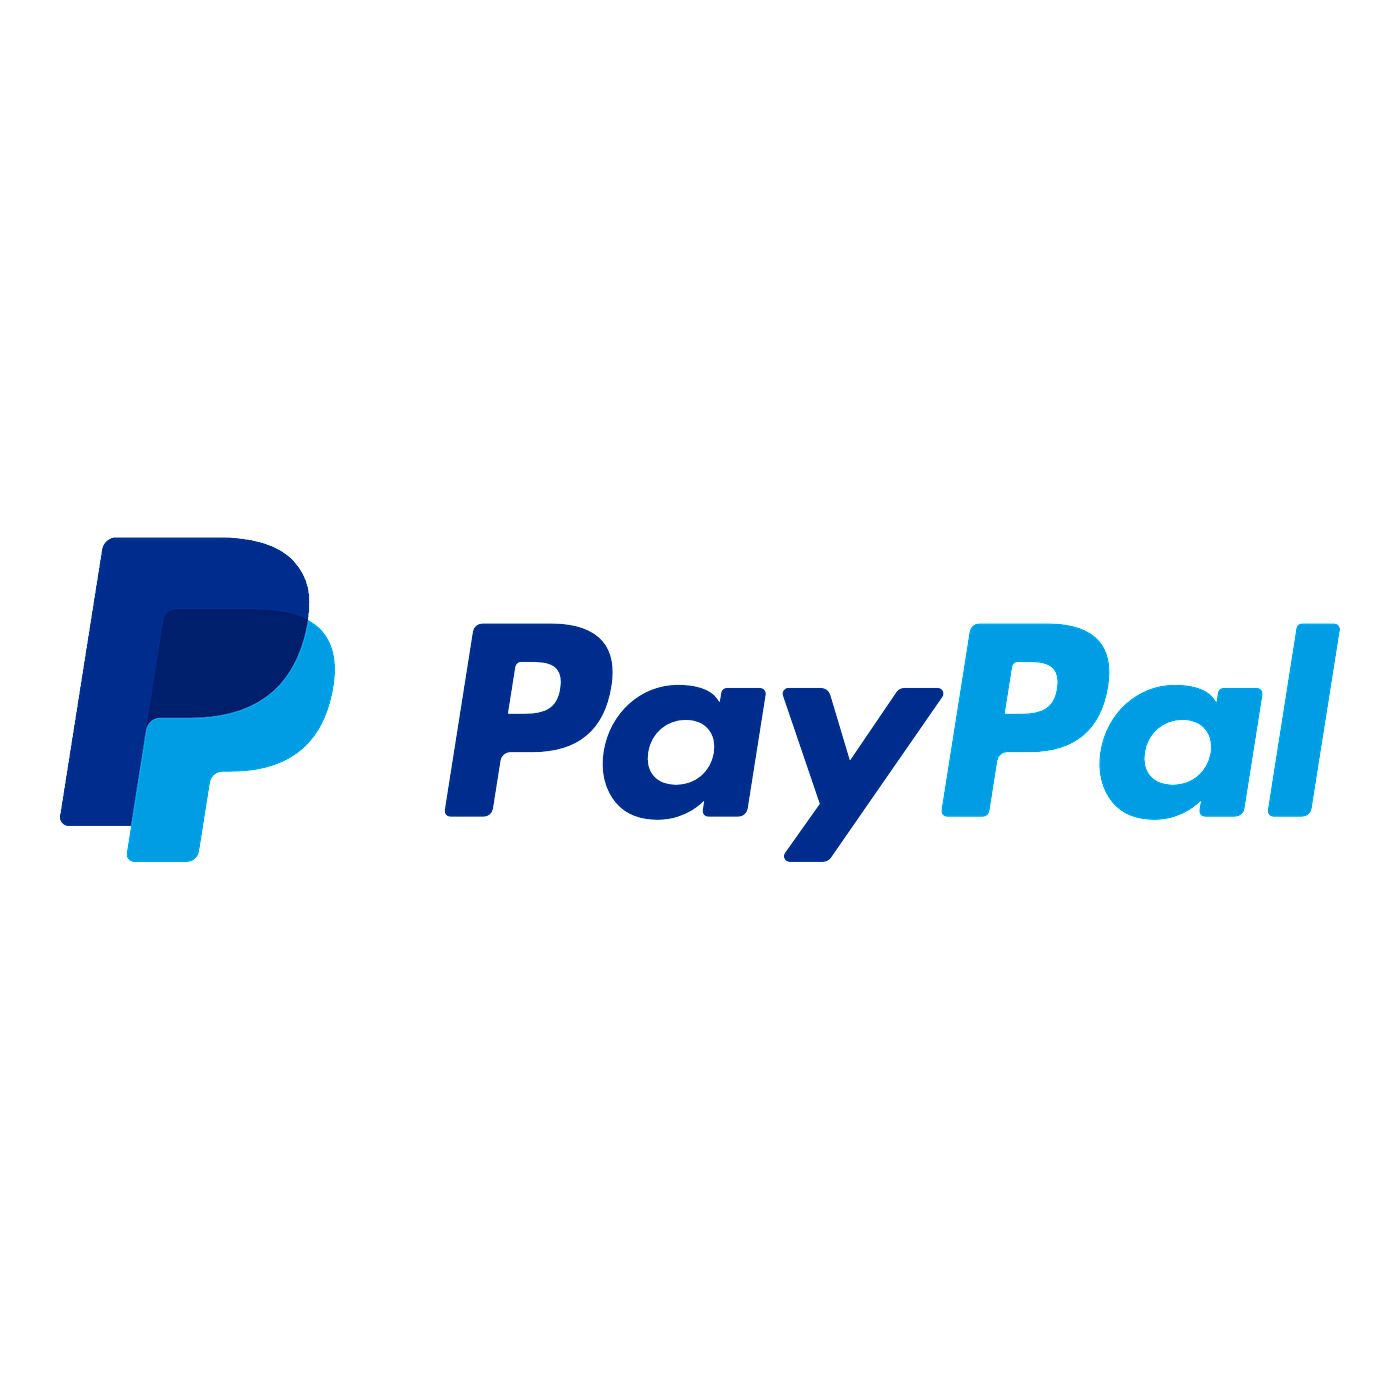 PayPal - Intervista a Michele Simone, Head of Partnerships, Southern Europe di PayPal